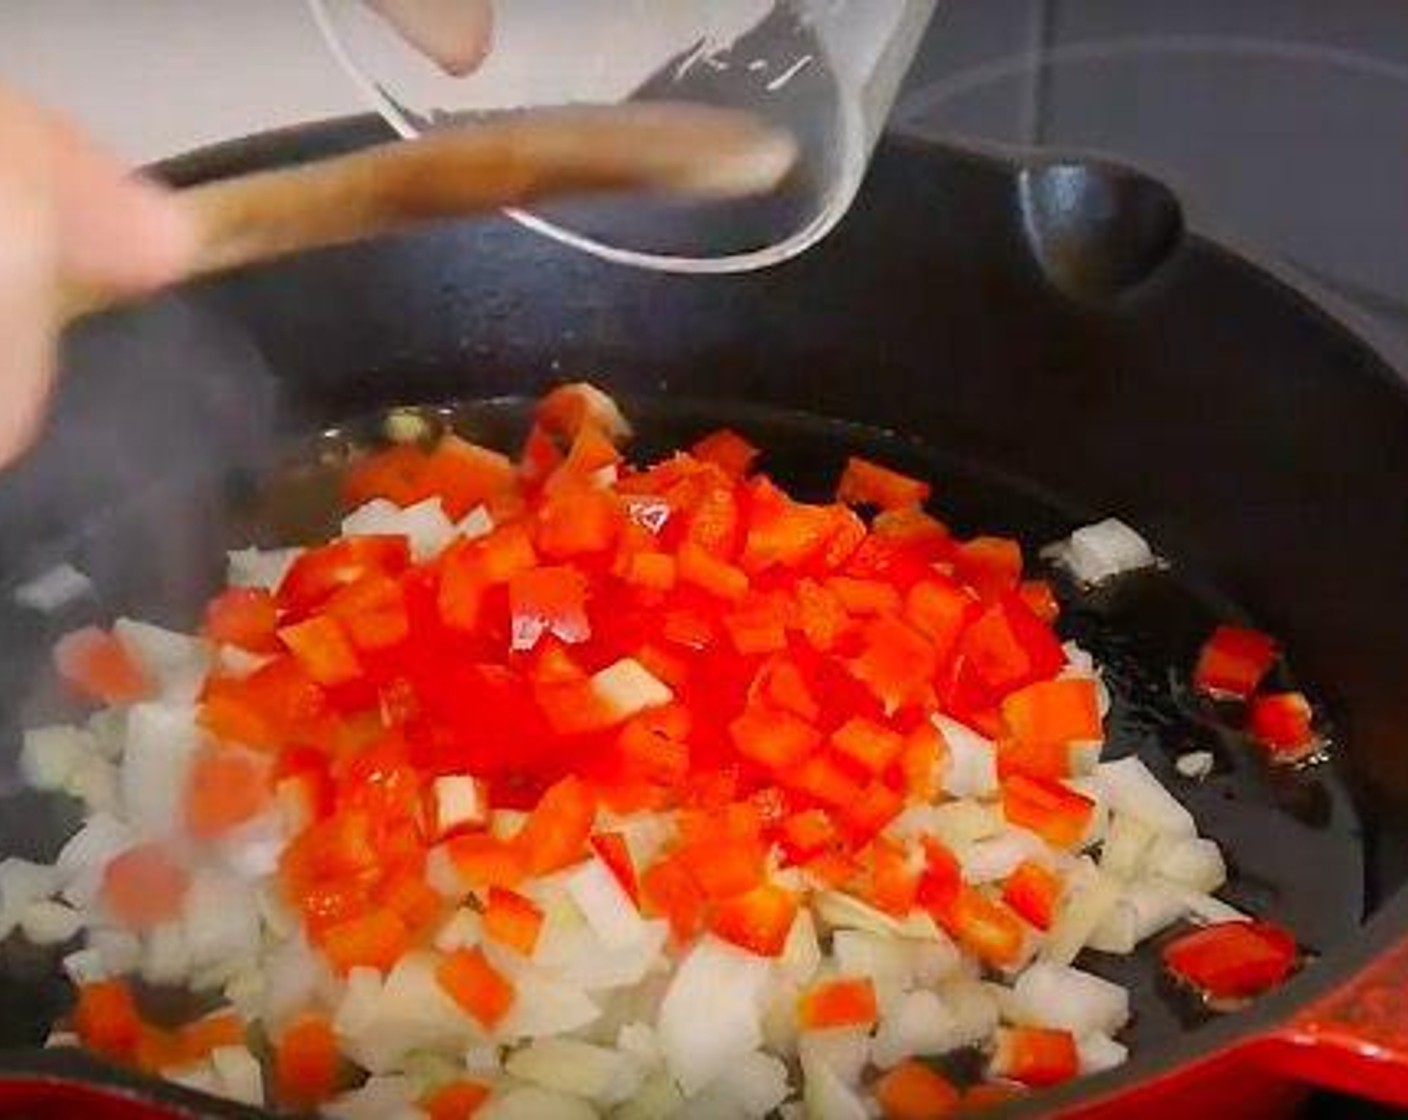 step 2 The first thing we need to do is a classic sofrito so we cook in a hot pan with some Olive Oil (as needed) or vegetable oil the Red Chili Pepper (1) and White Onion (1). Once they are soft, grate the Garlic (4 cloves) and continue to cook for 5 minutes.